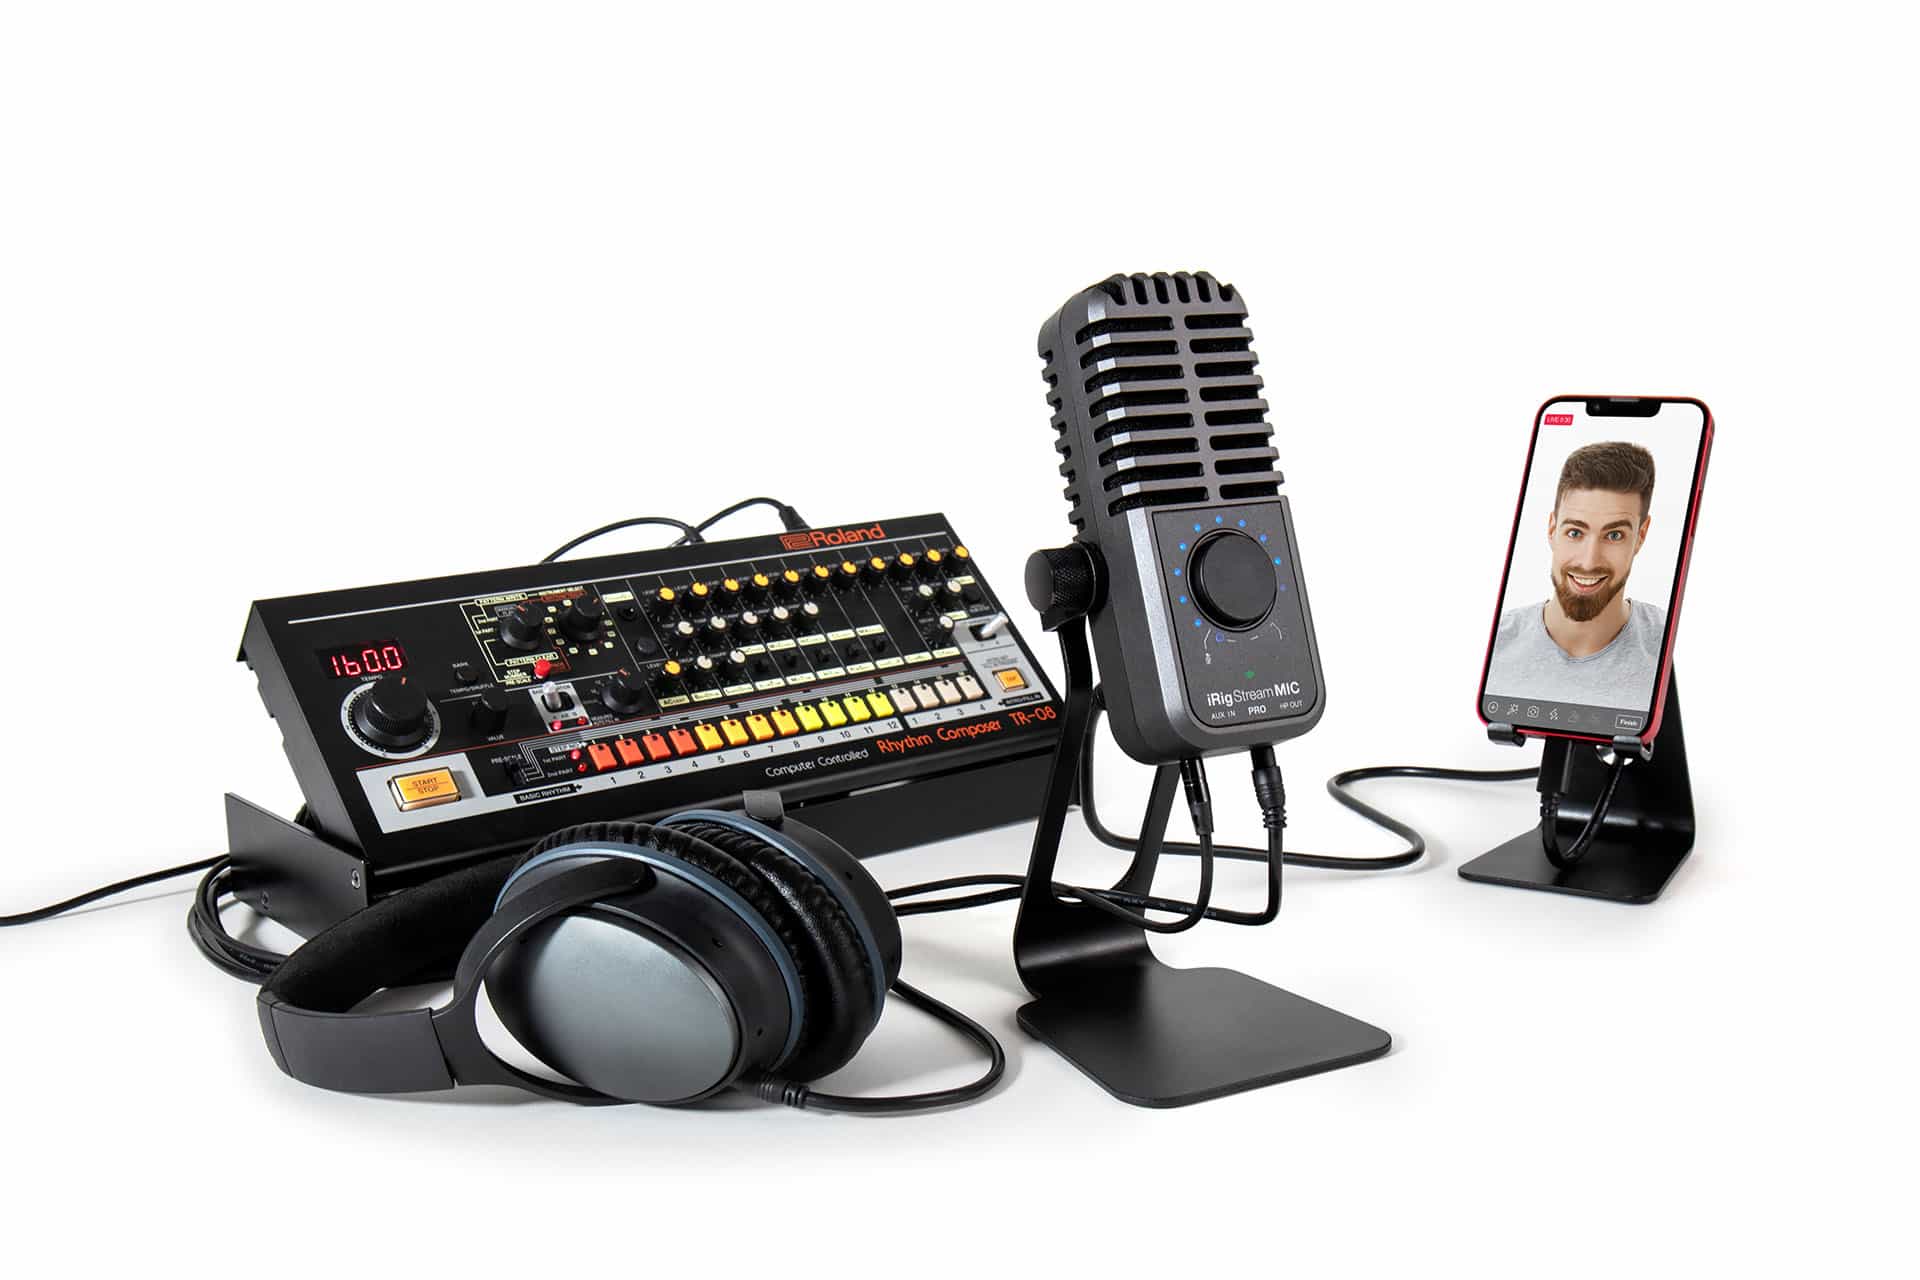 PC/タブレット PC周辺機器 iRig Stream Mic Pro - Compact multi-pattern microphone and stereo 